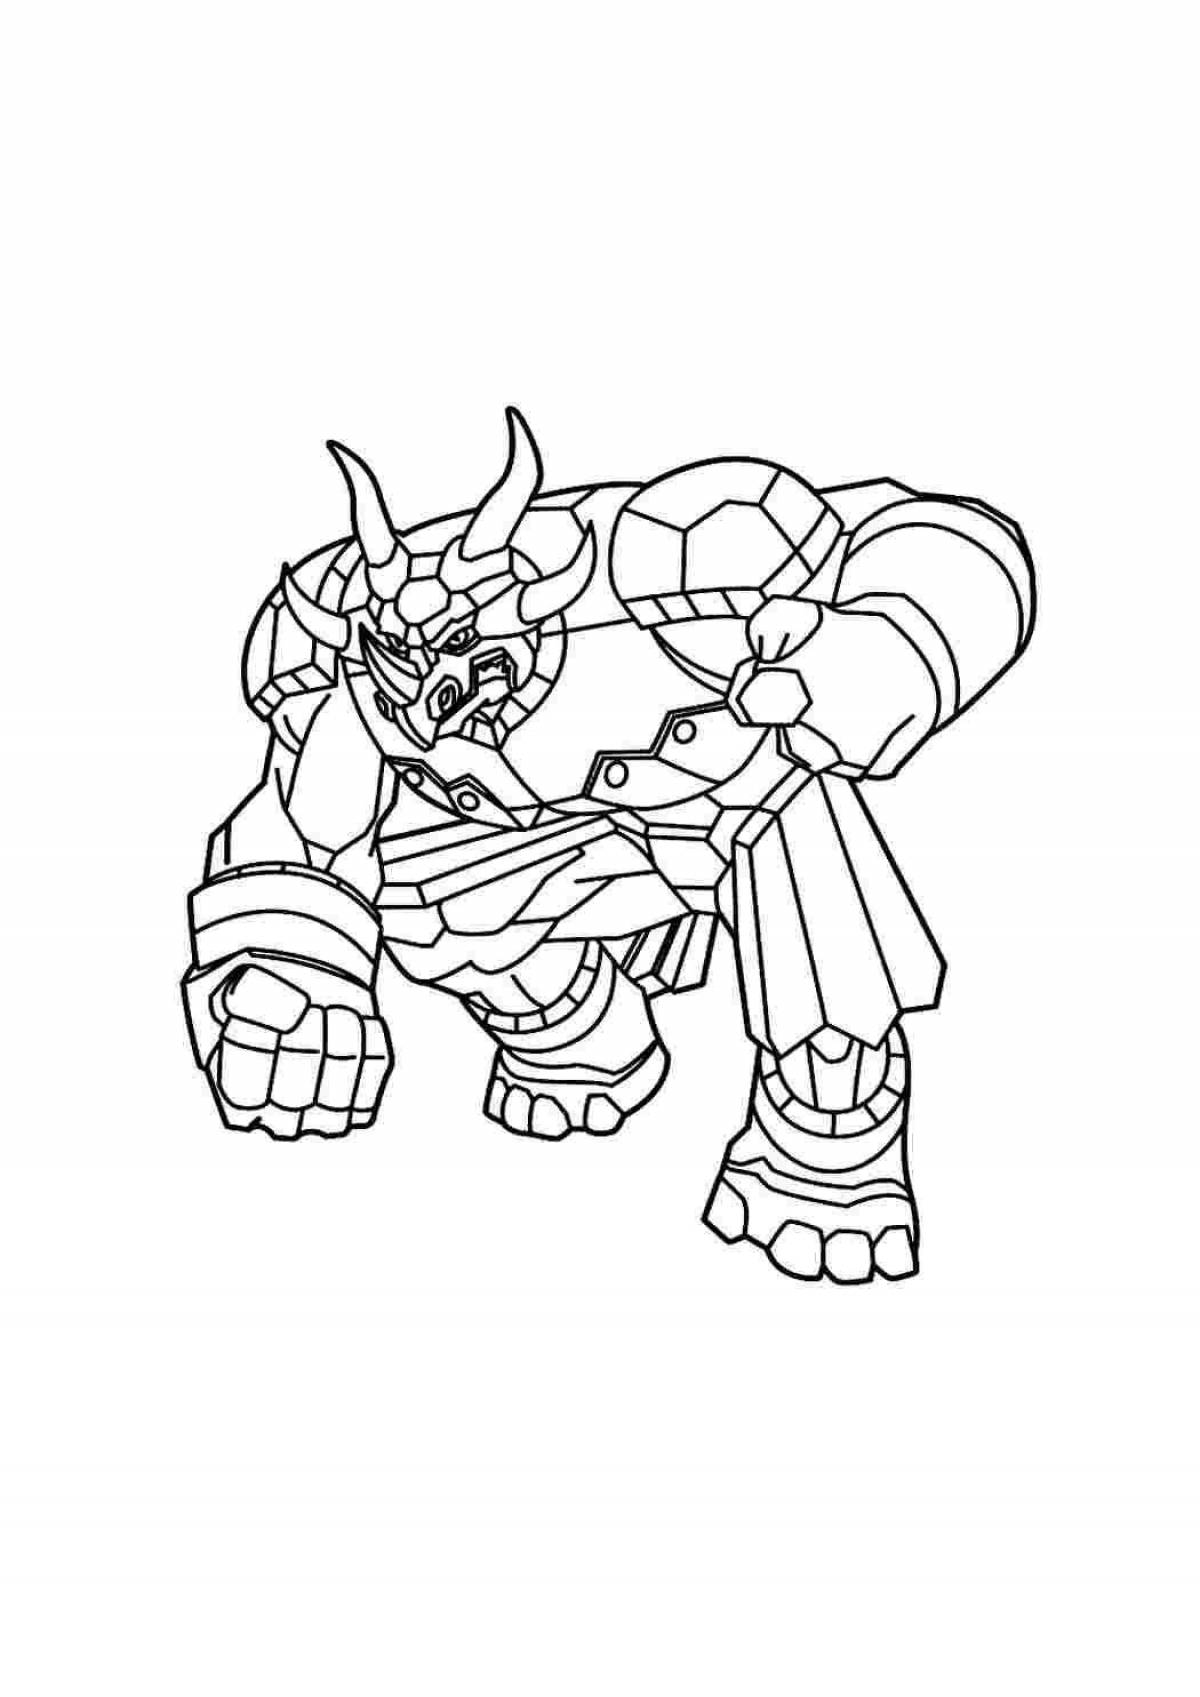 Coloring page awesome robot with siren head